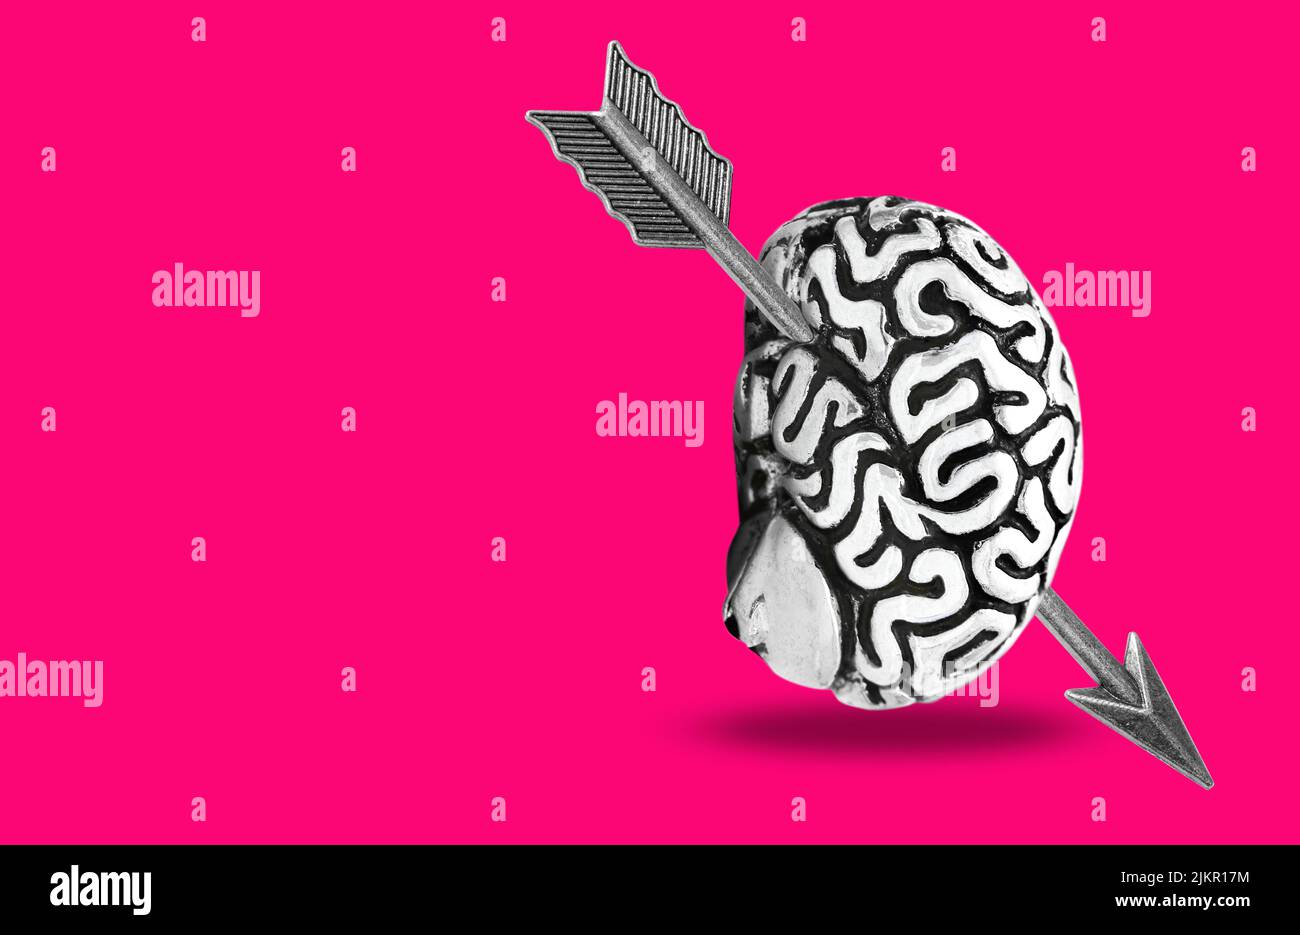 Steel feathered arrow gone through a human brain isolated on pink background. First sight affection concept. Stock Photo